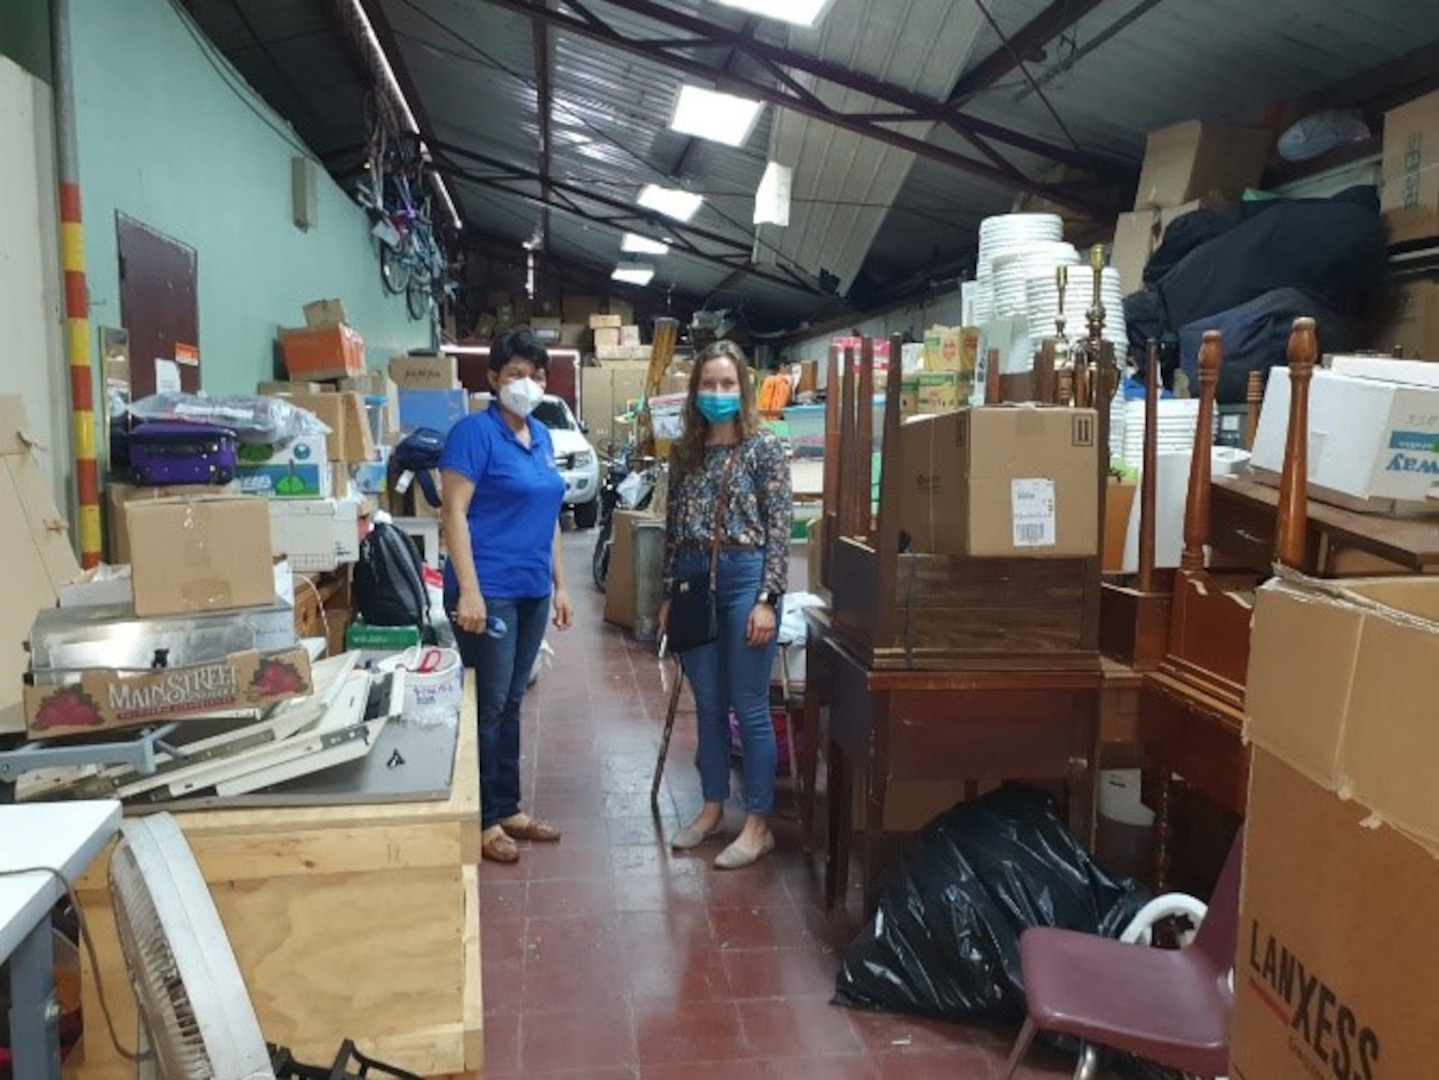 Two employees stand in the Wisconsin/Nicaragua Partners of the Americas Inc. headquarters and warehouse where all donated items are offloaded and organized before being redistributed across Nicaragua. The Wisconsin National Guard helps support aid programs like the Wisconsin/Nicaragua Partners as part of its State Partnership Program with Nicaragua.